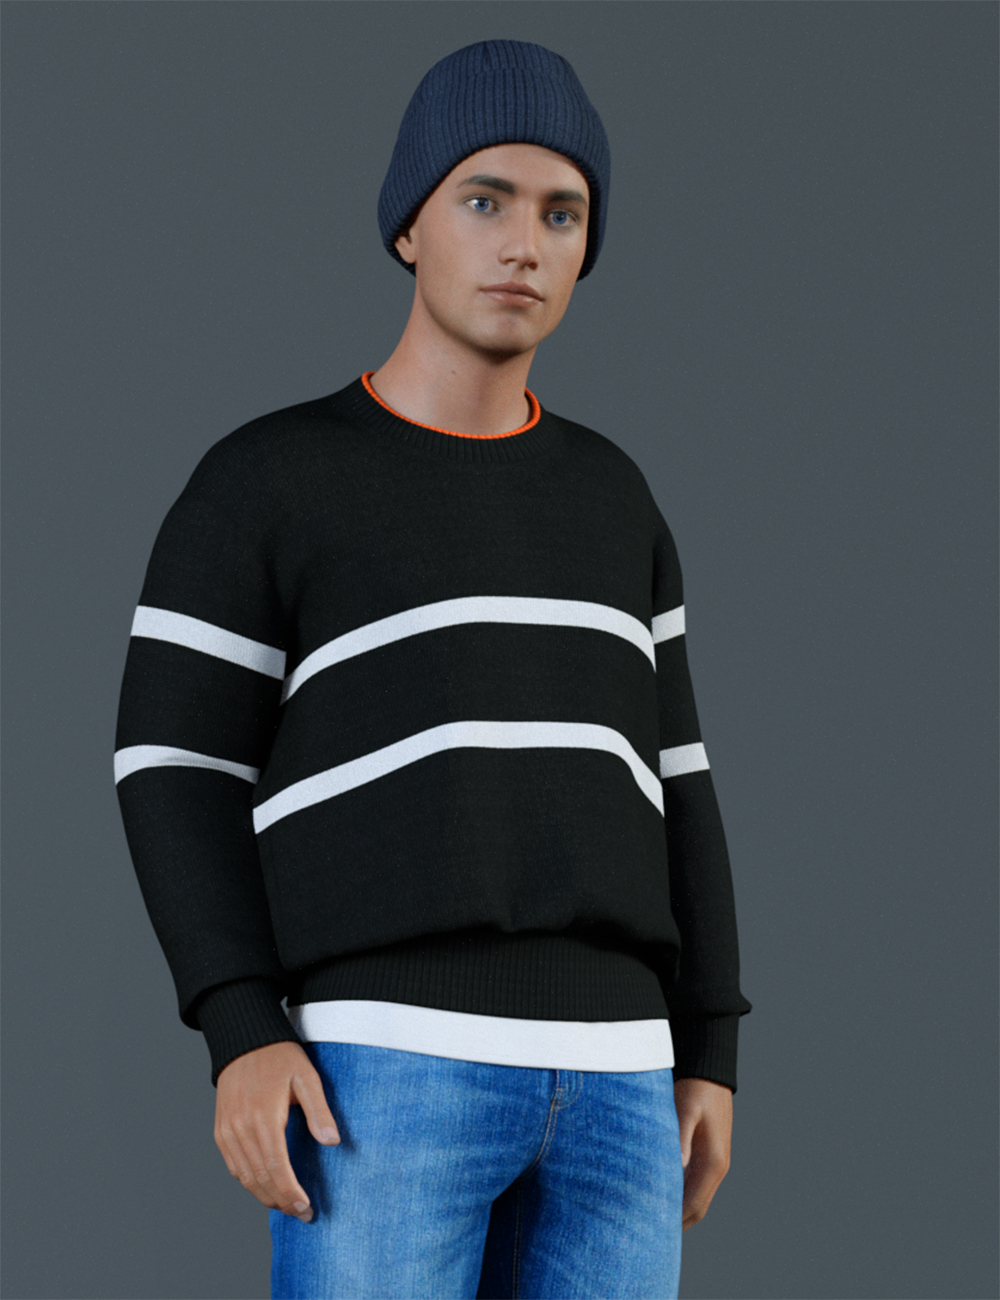 H&C Knit Sweater Outfit for Genesis 8 Male(s) by: IH Kang, 3D Models by Daz 3D